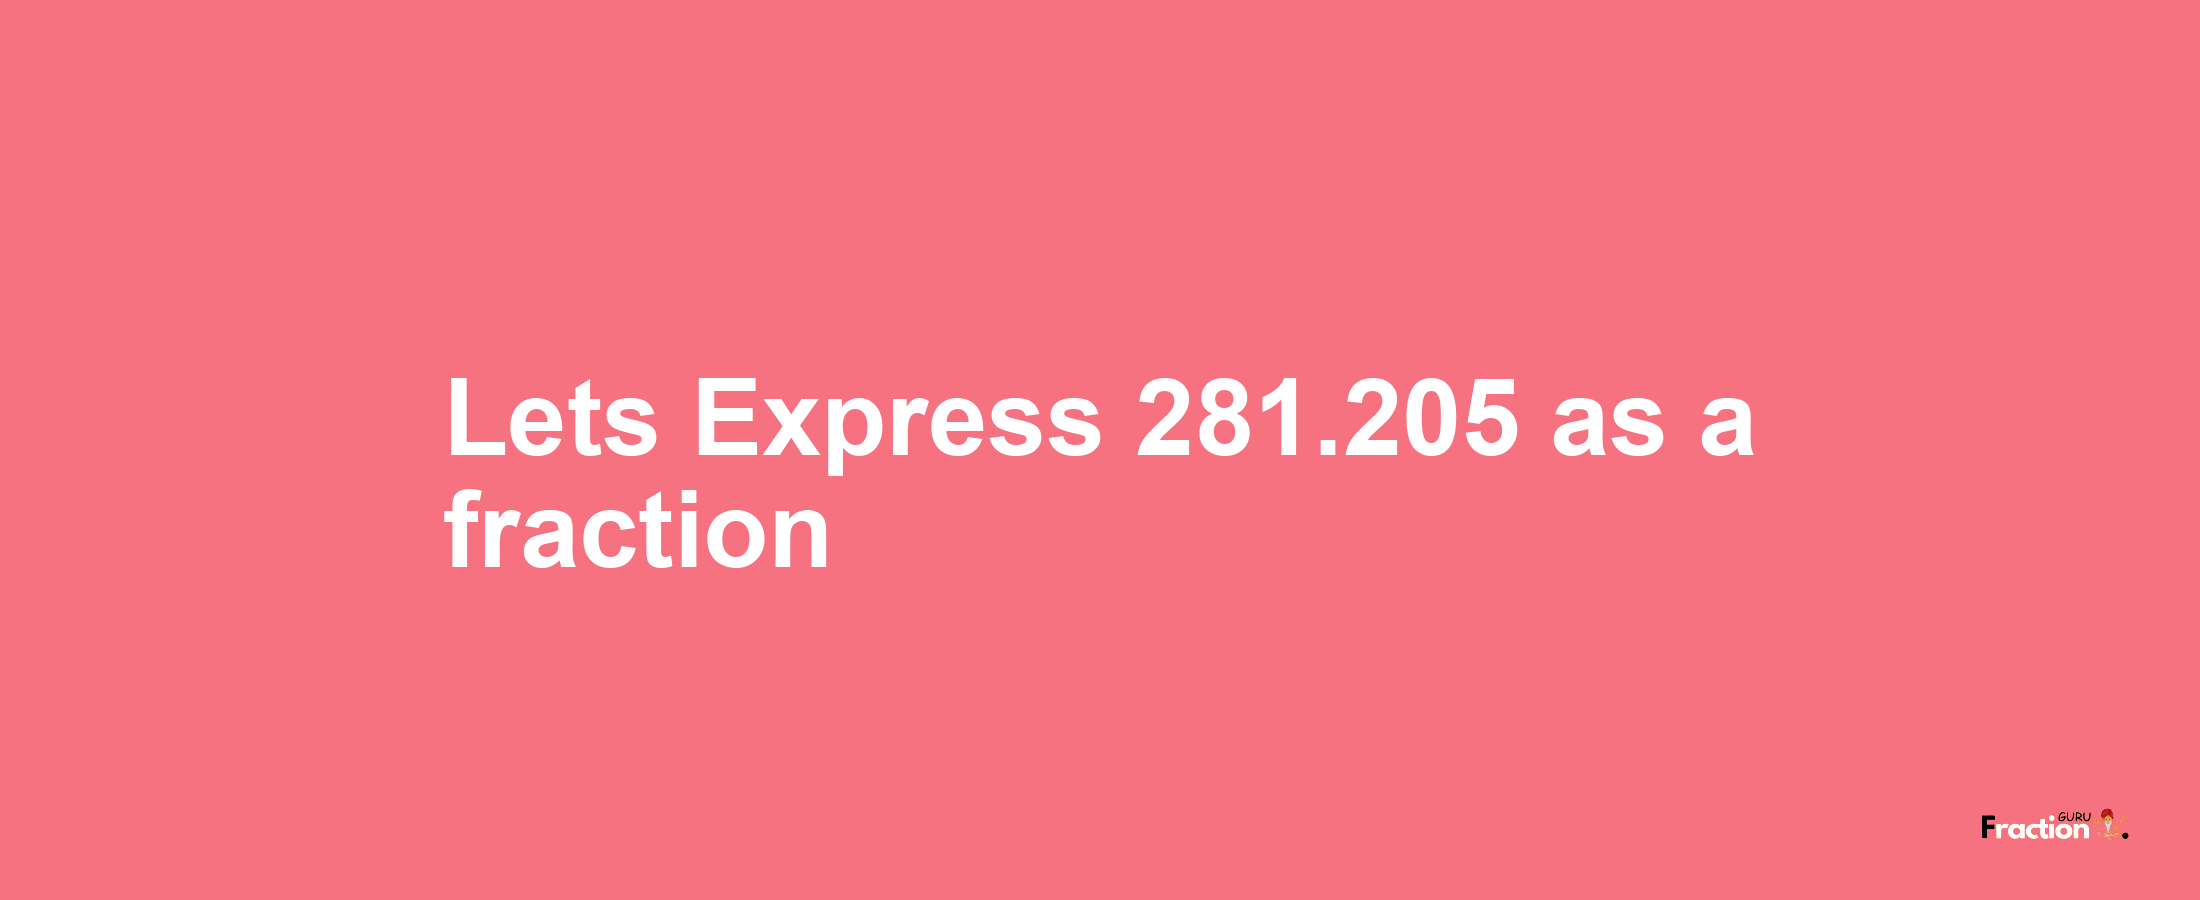 Lets Express 281.205 as afraction